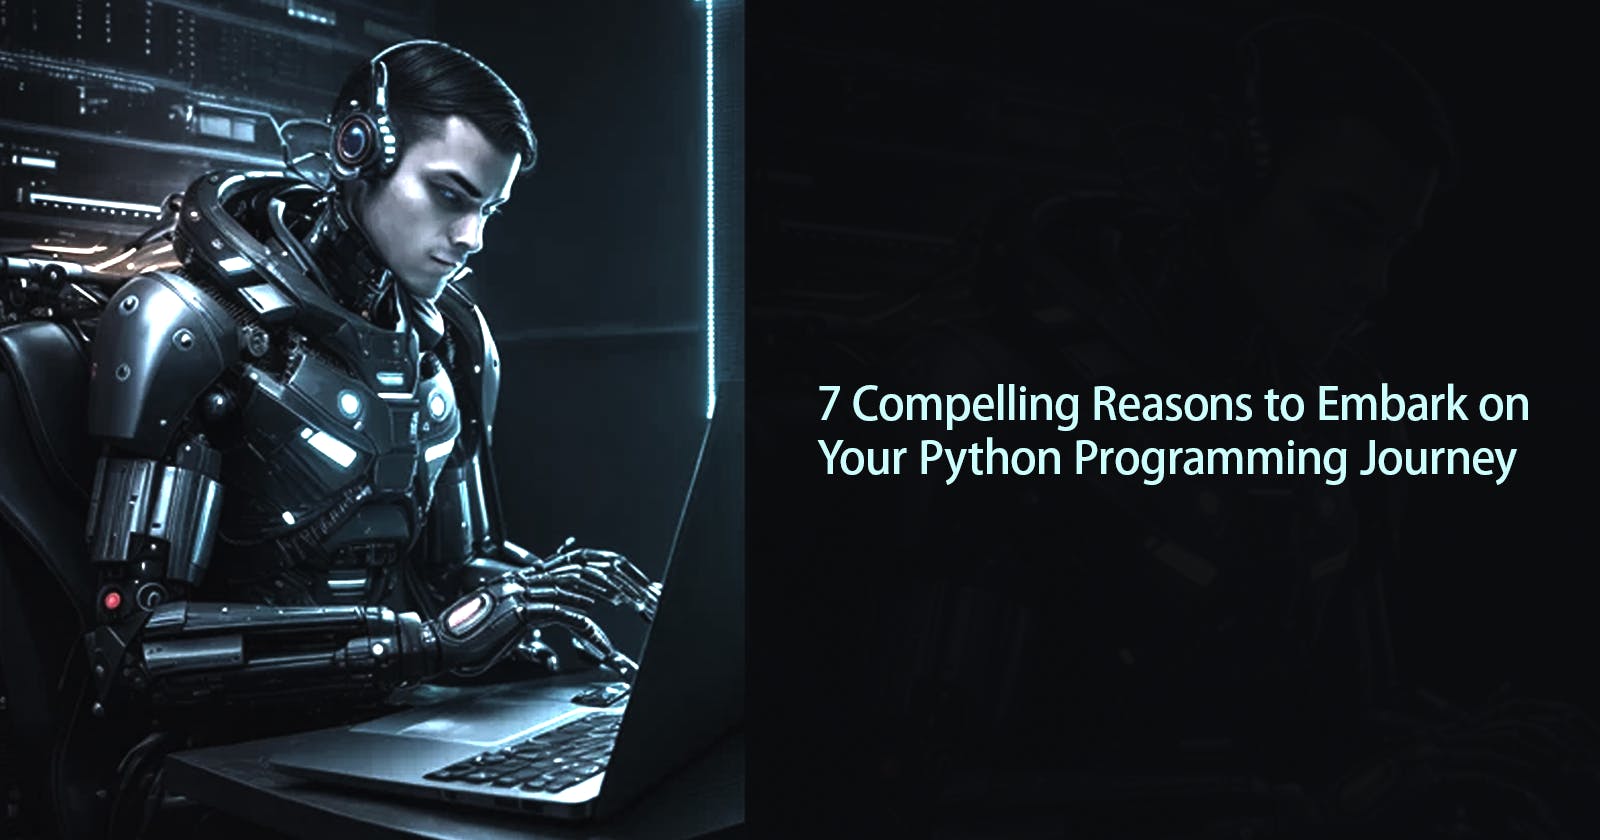 7 Compelling Reasons to Embark on Your Python Programming Journey